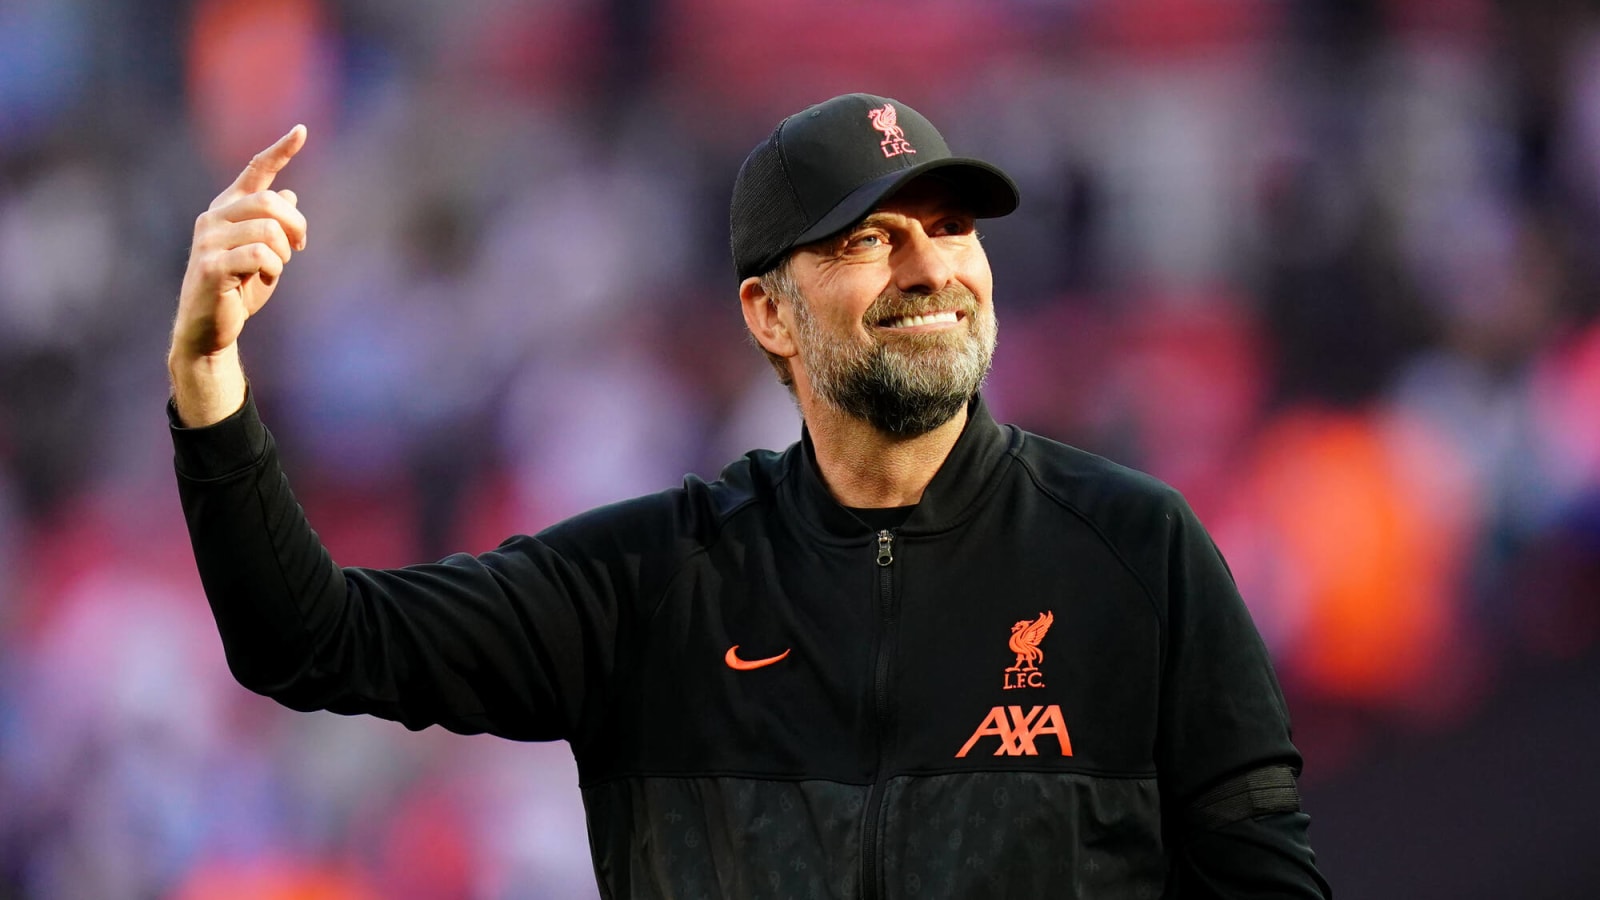 Jurgen Klopp adamant FSG had ‘nothing to do with’ decision to leave Liverpool